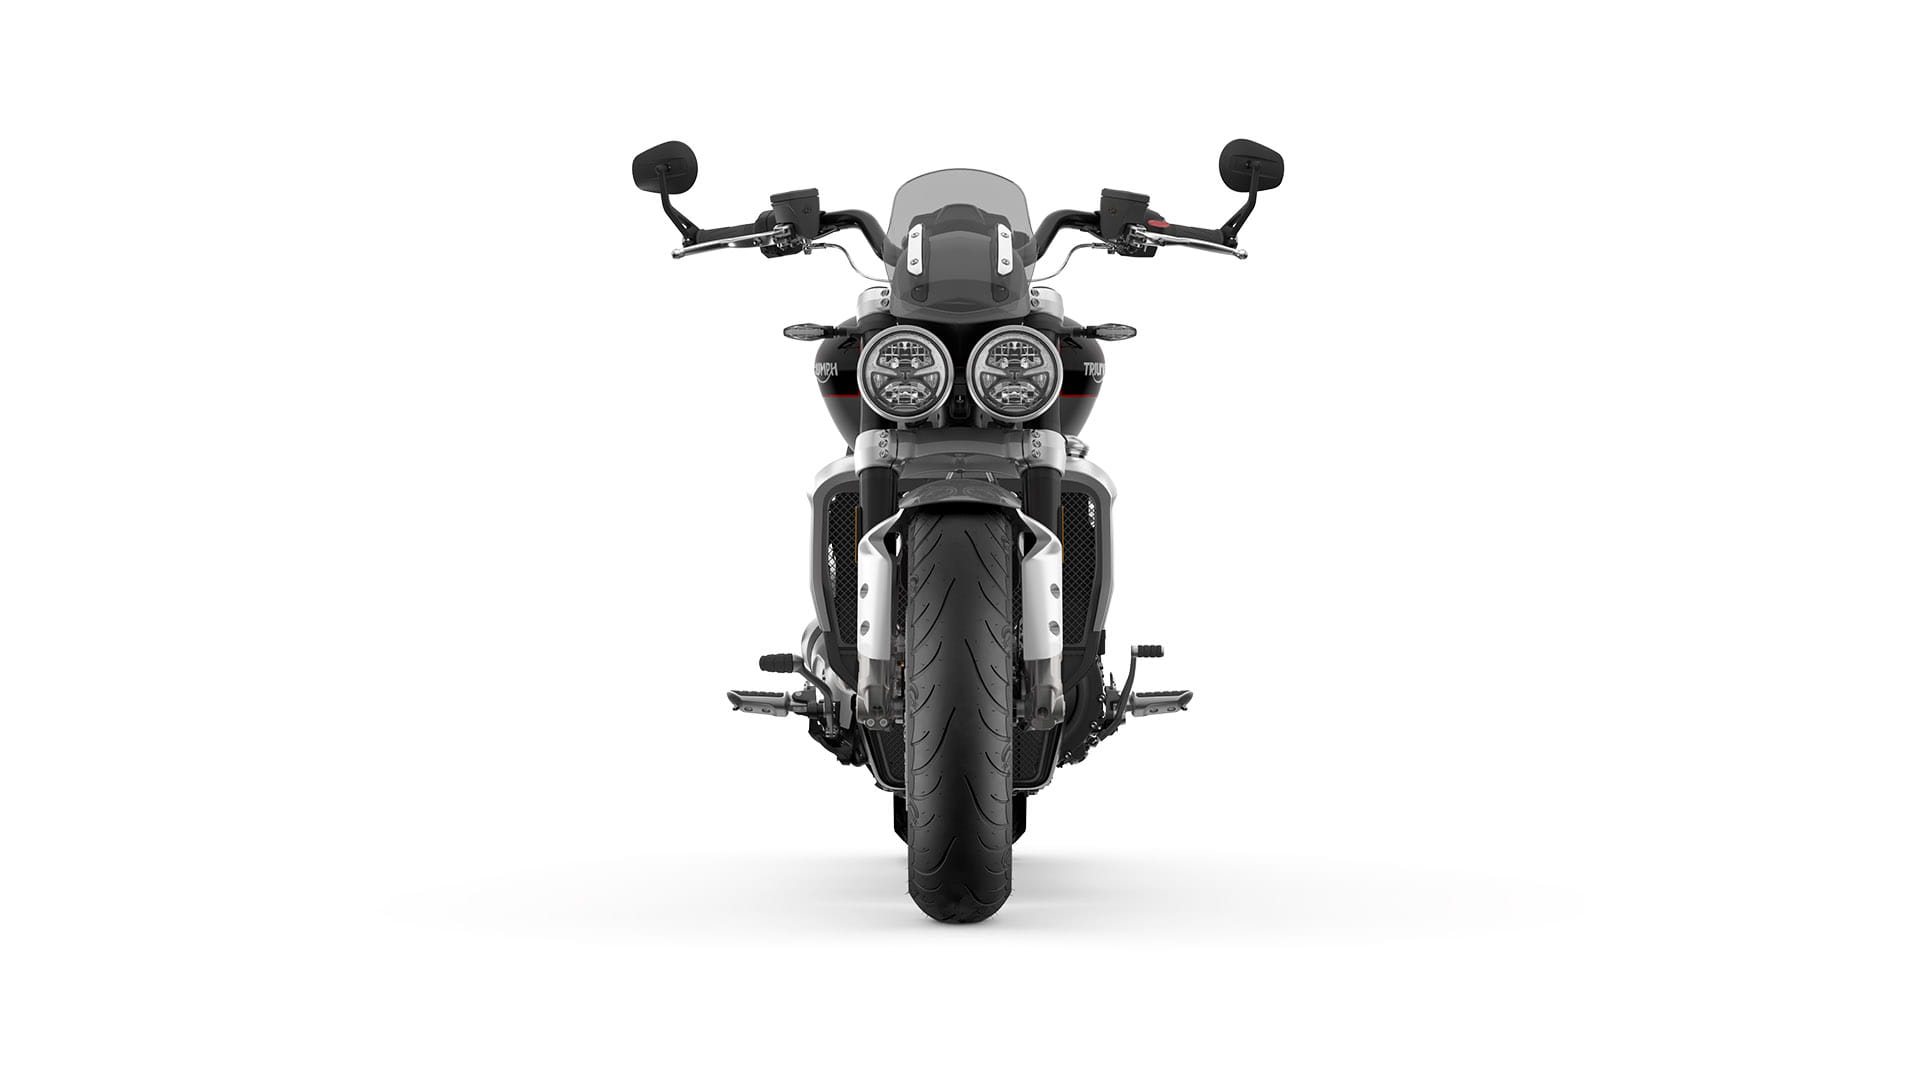 Front CGI of Triumph Rocket 3 GT in Silver Ice and storm grey with extended fly screen, stylish handlebars and twin LED headlight.